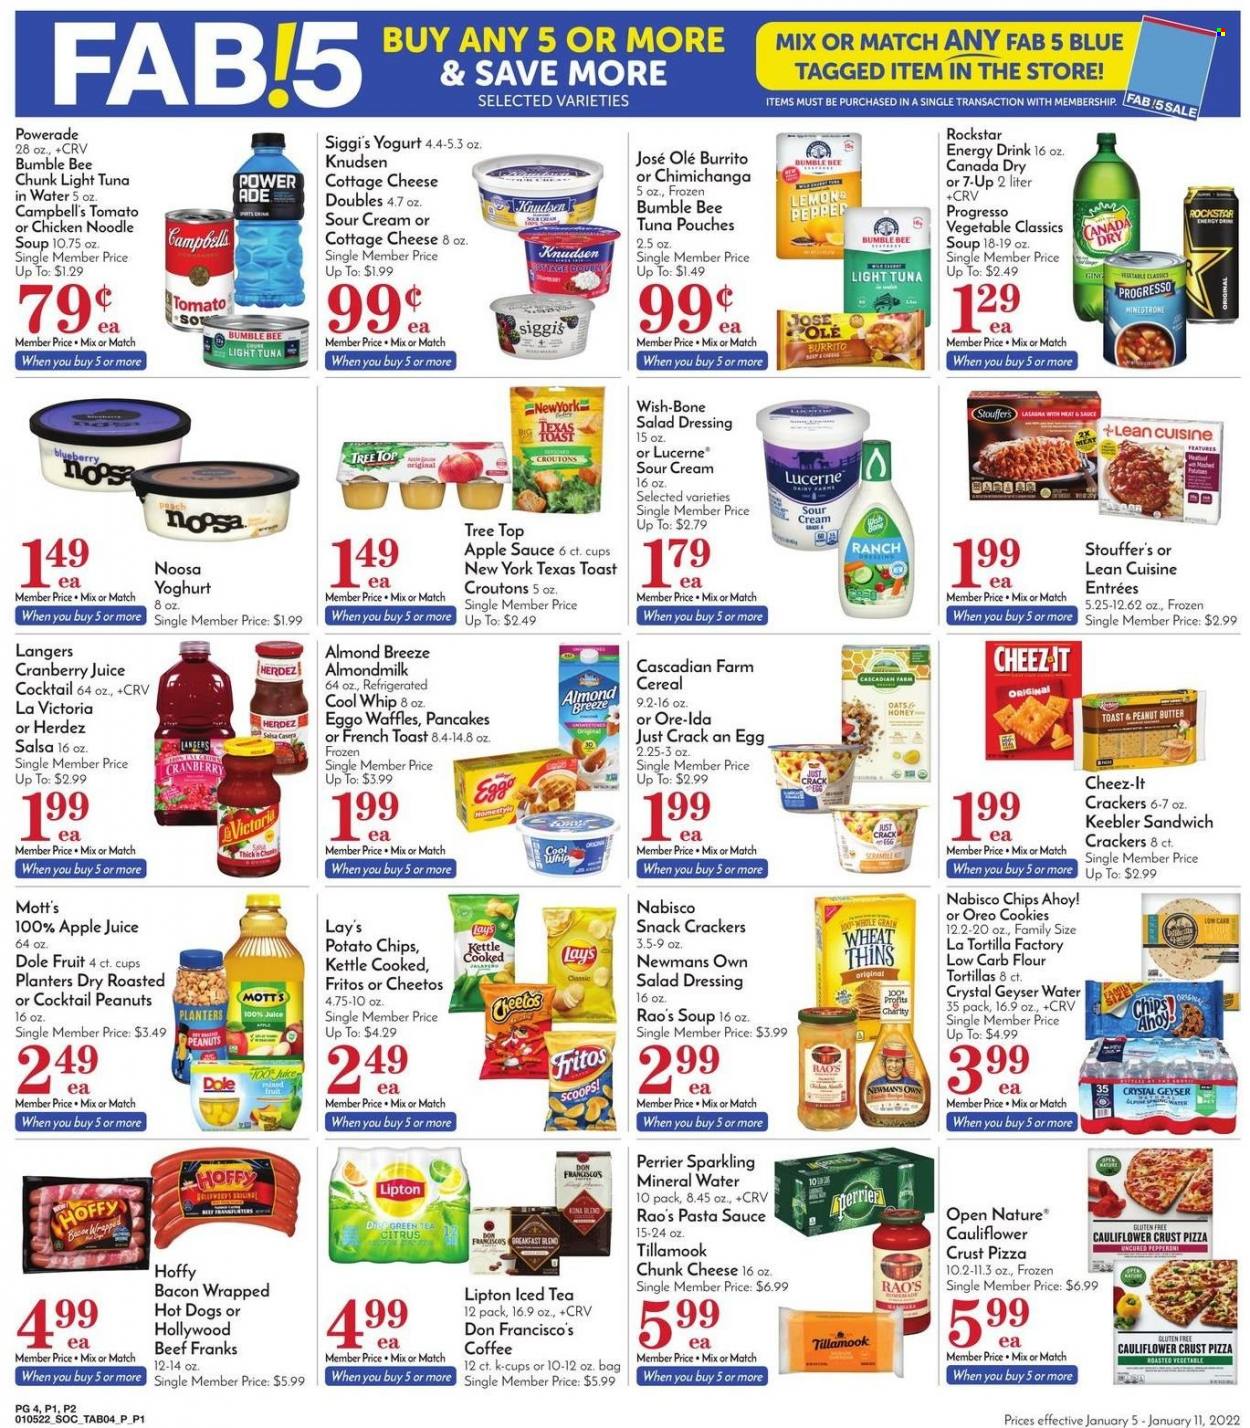 thumbnail - Pavilions Flyer - 01/05/2022 - 01/11/2022 - Sales products - tortillas, flour tortillas, waffles, Dole, Mott's, tuna, Campbell's, hot dog, pizza, pasta sauce, soup, Bumble Bee, noodles cup, burrito, noodles, Progresso, lasagna meal, Lean Cuisine, bacon, cottage cheese, chunk cheese, Oreo, yoghurt, almond milk, Almond Breeze, Cool Whip, sour cream, Stouffer's, Ore-Ida, cookies, snack, crackers, Chips Ahoy!, Keebler, Fritos, potato chips, Cheetos, Lay’s, Thins, Cheez-It, croutons, oats, tuna in water, light tuna, cereals, salad dressing, dressing, salsa, apple sauce, peanut butter, peanuts, Planters, apple juice, Canada Dry, cranberry juice, Powerade, juice, energy drink, Lipton, ice tea, 7UP, Perrier, Rockstar, mineral water, sparkling water, coffee, coffee capsules, K-Cups, breakfast blend. Page 6.